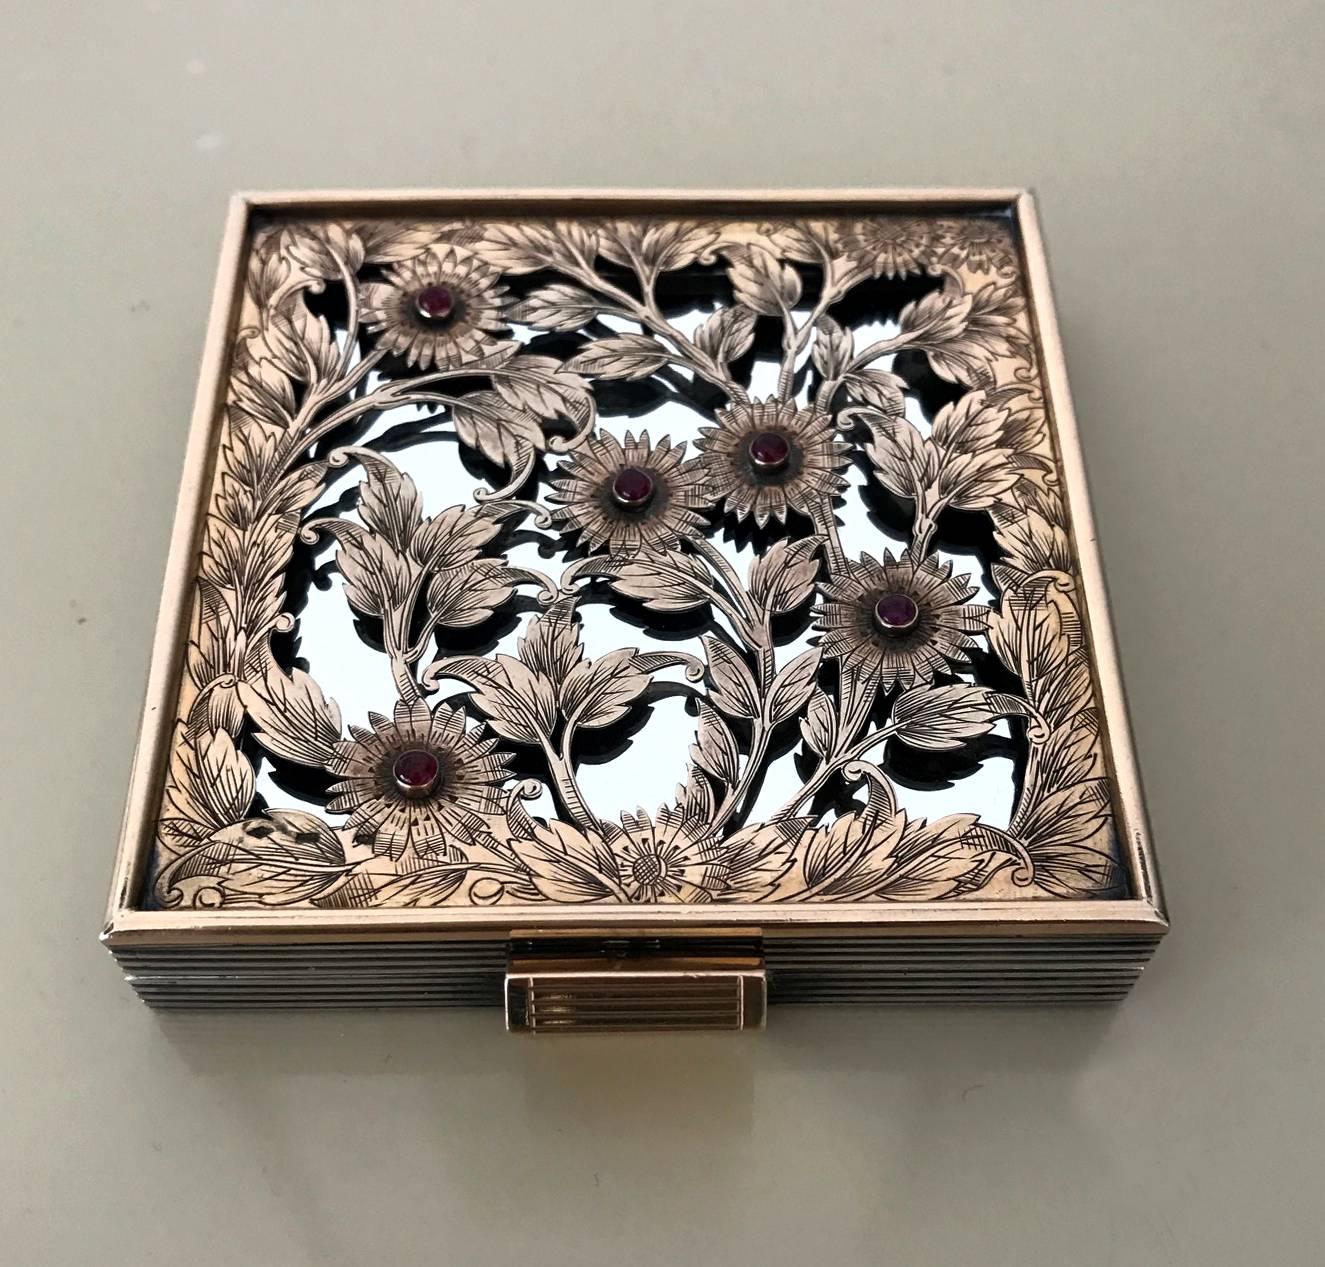 A stunning silver compact case or box by Boucheron Paris circa 1935, of Art Deco period and style. The case with ribbed surface was fitted with an elaborate pierced and engraved floral pattern gilt cover that is set with five cabochon rubies. 
The